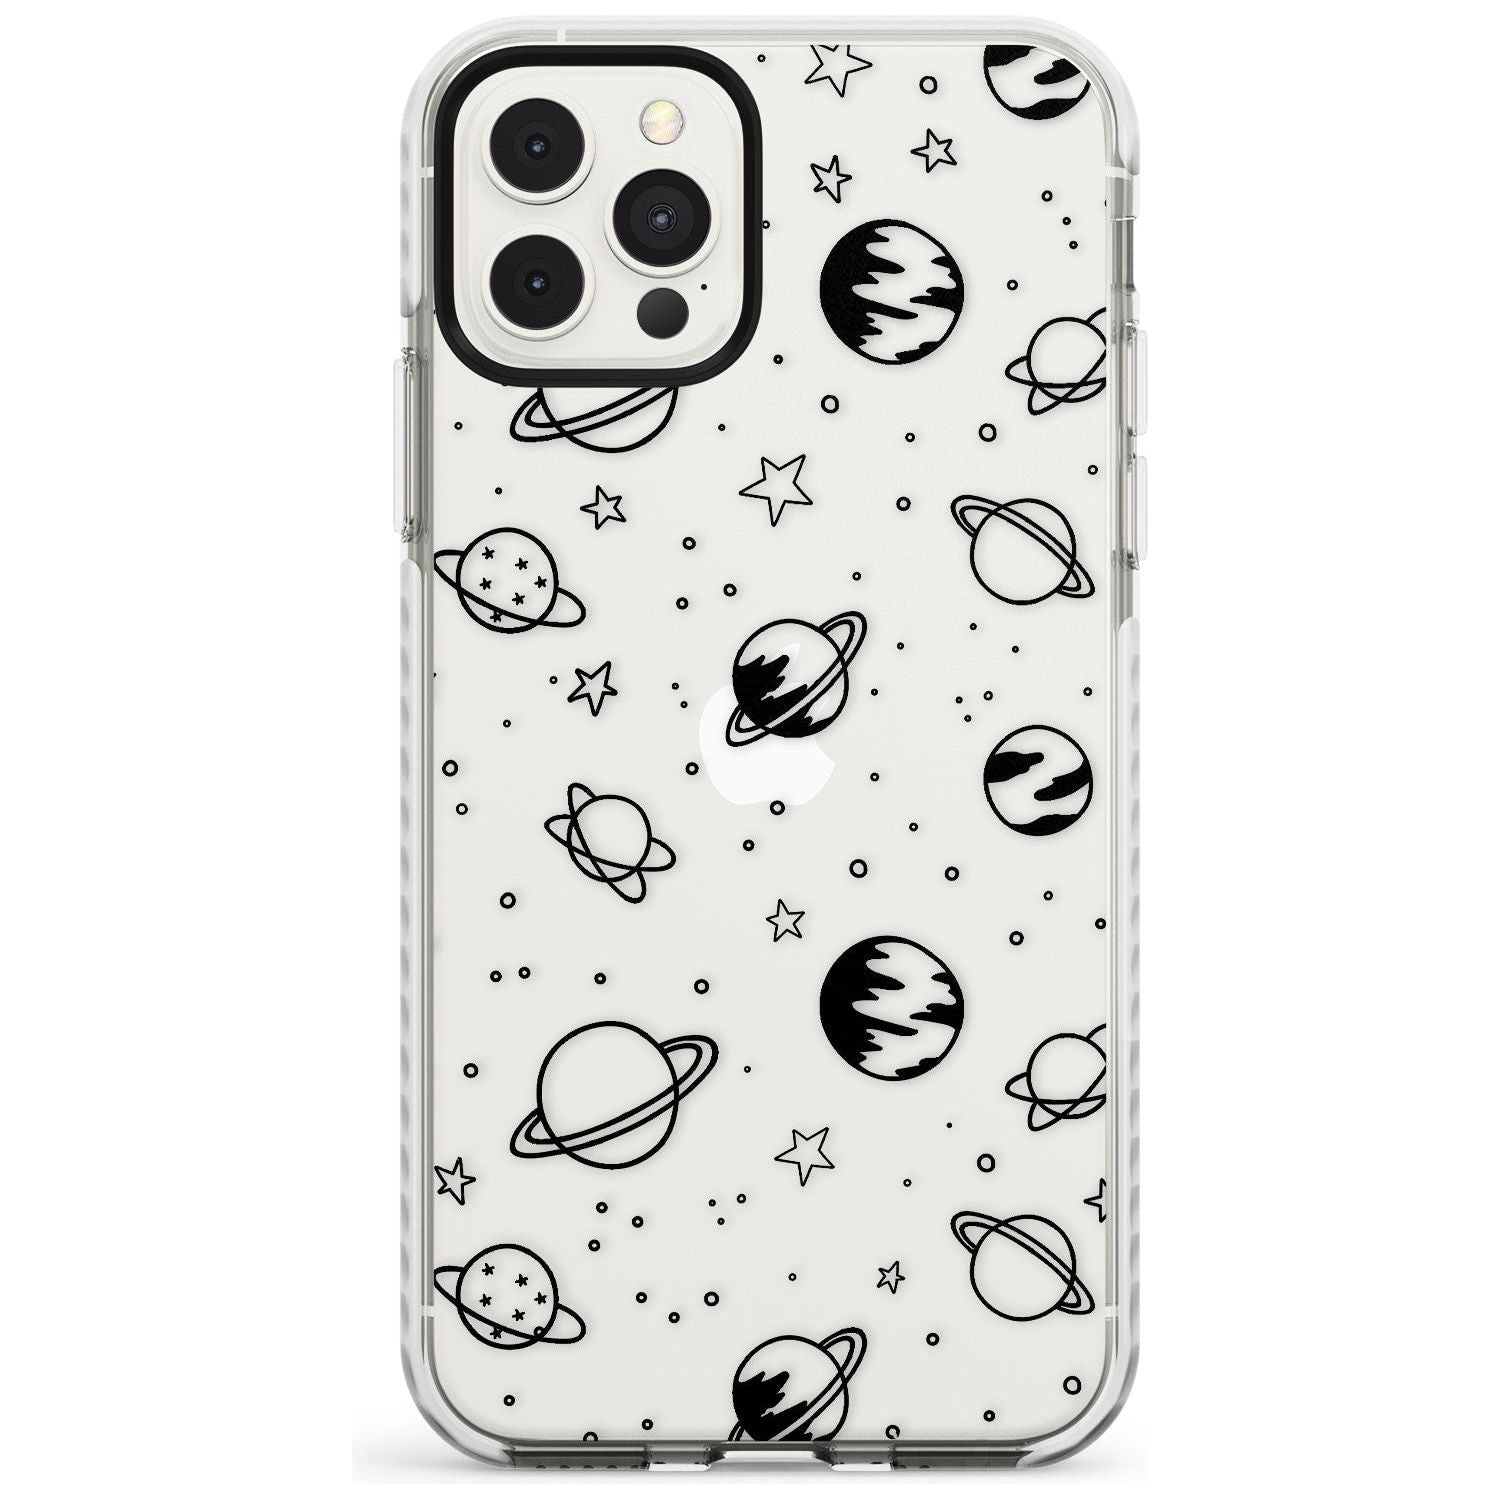 Outer Space Outlines: Black on Clear Slim TPU Phone Case for iPhone 11 Pro Max